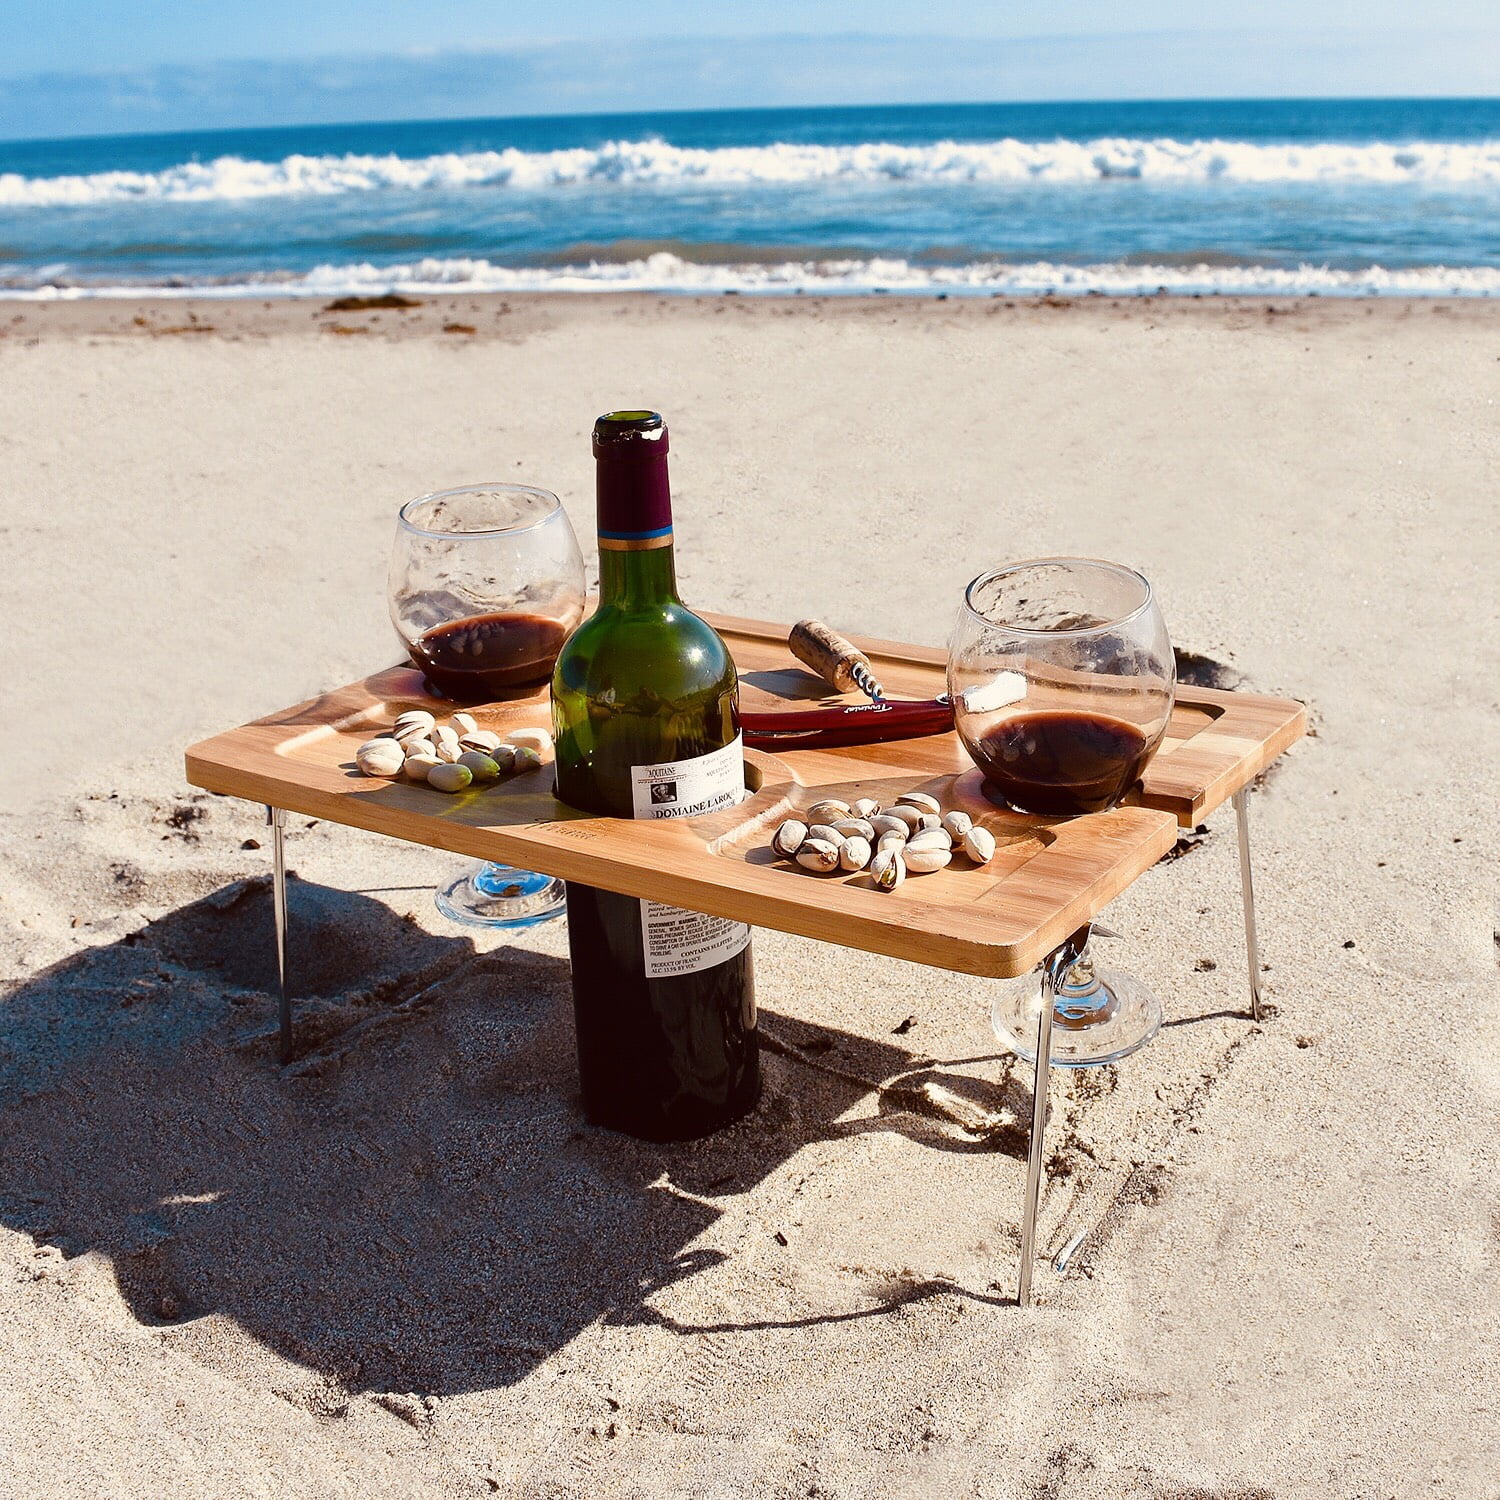 Details about   Folding Wood Table Picnic Camping Travel Beach Portable Outdoor/Indoor Large NEW